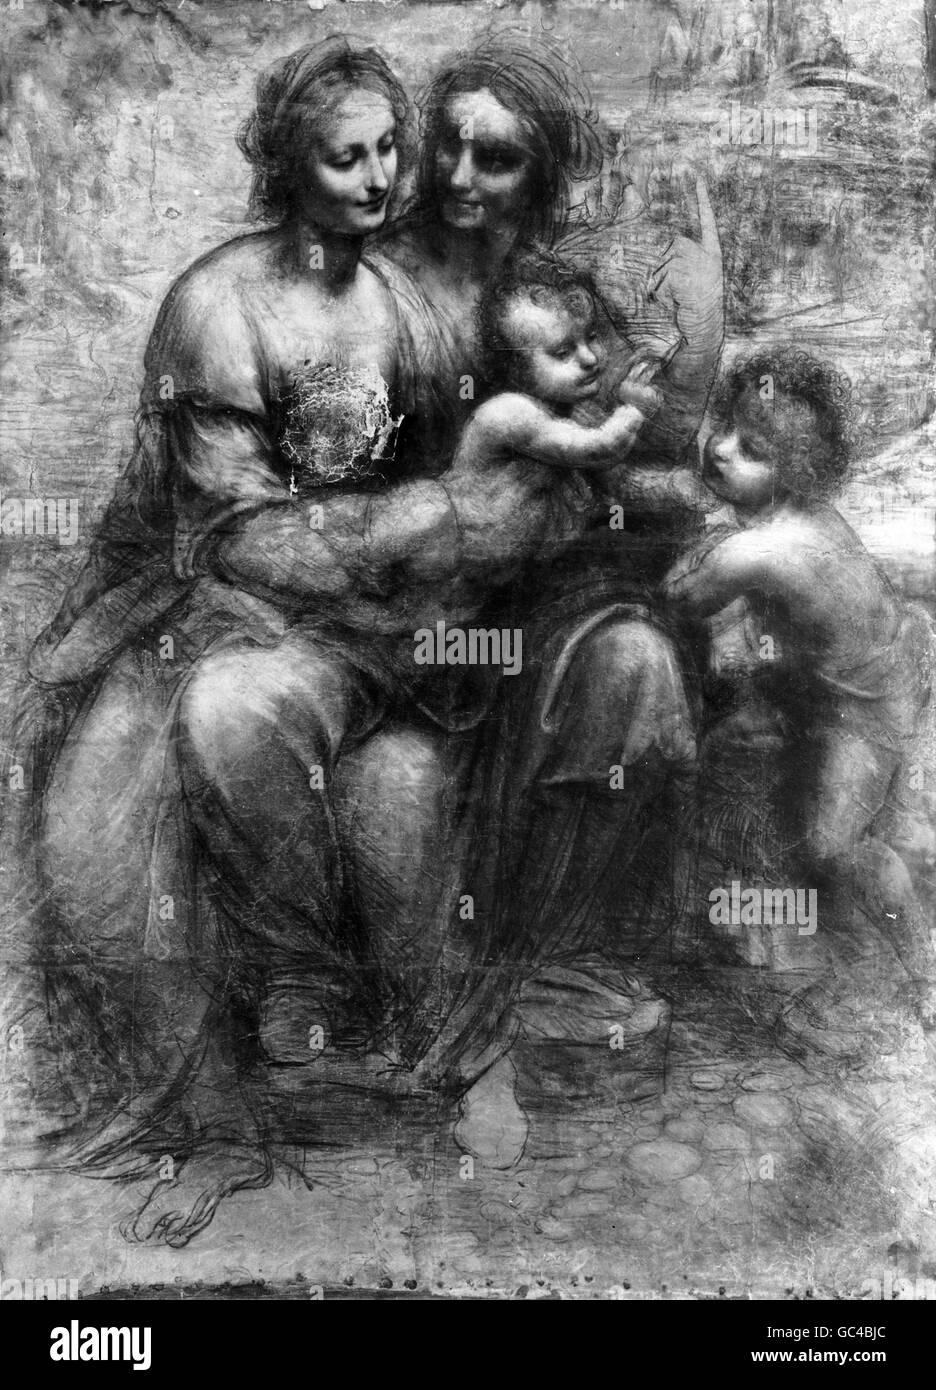 A SECTION OF THE LEONARDO DA VINCI CARTTON, THE VIRGIN & CHILD WITH SAINT ANNE & SAINT JOHN THE BAPTIST SHOWING THE DAMAGE IS SUSTAINED WHEN IT WAS SHOT AT WHILE HANGING IN THE NATIONAL GALLERY. Stock Photo